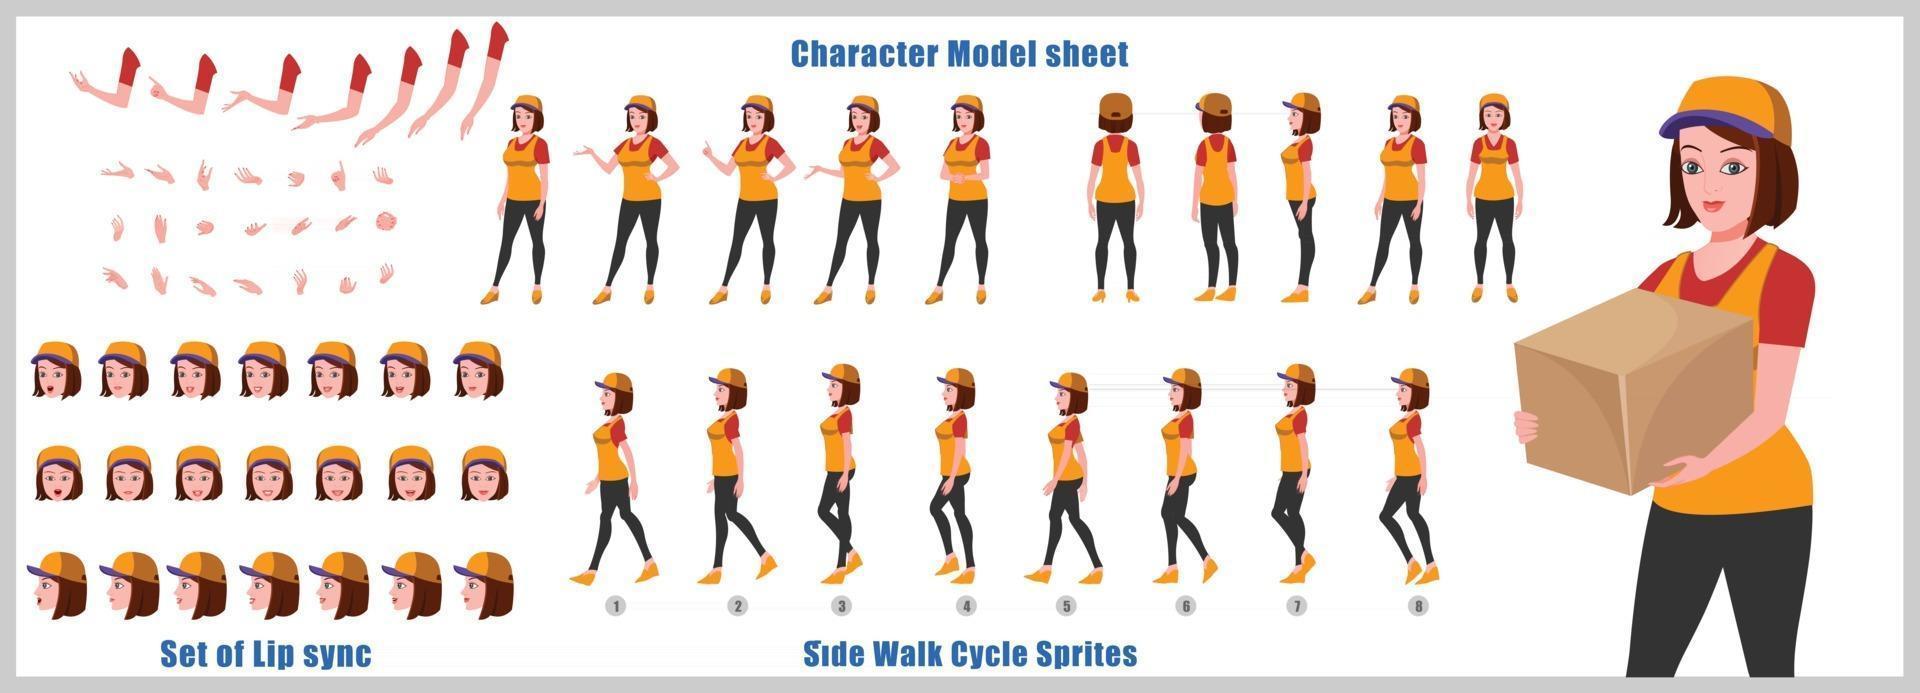 Courier Girl Character Design Model Sheet Girl Character design Front side back view and explainer animation poses Character set with lip sync Animation sequence of all front Back and side walk cycle animation sequences vector